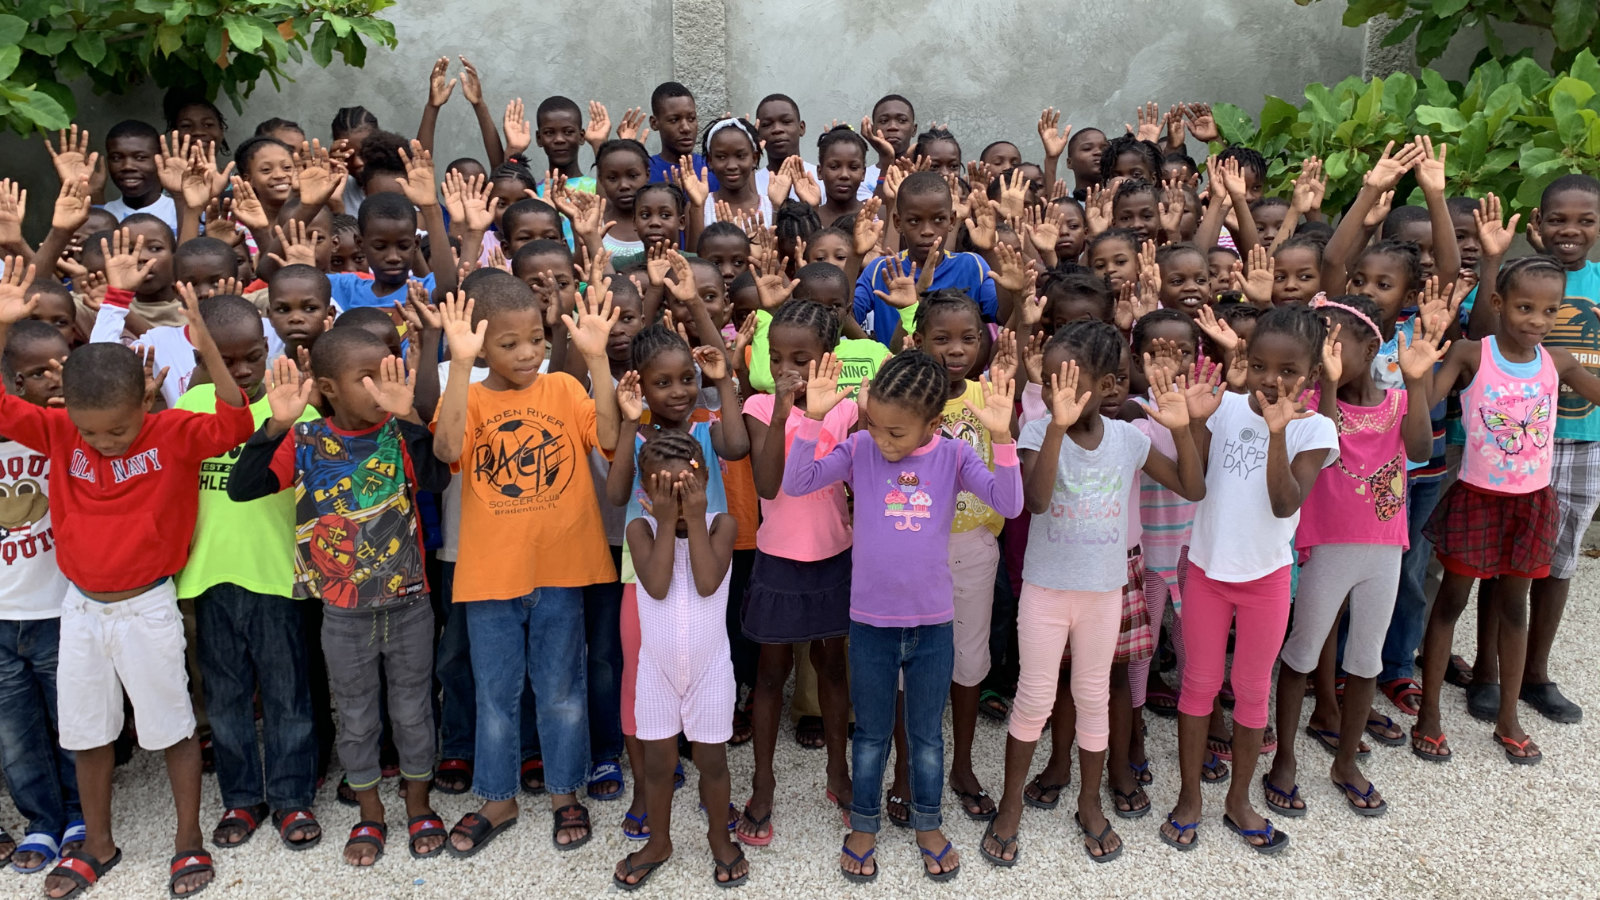 A large group of children with hands up in the air and smiling.